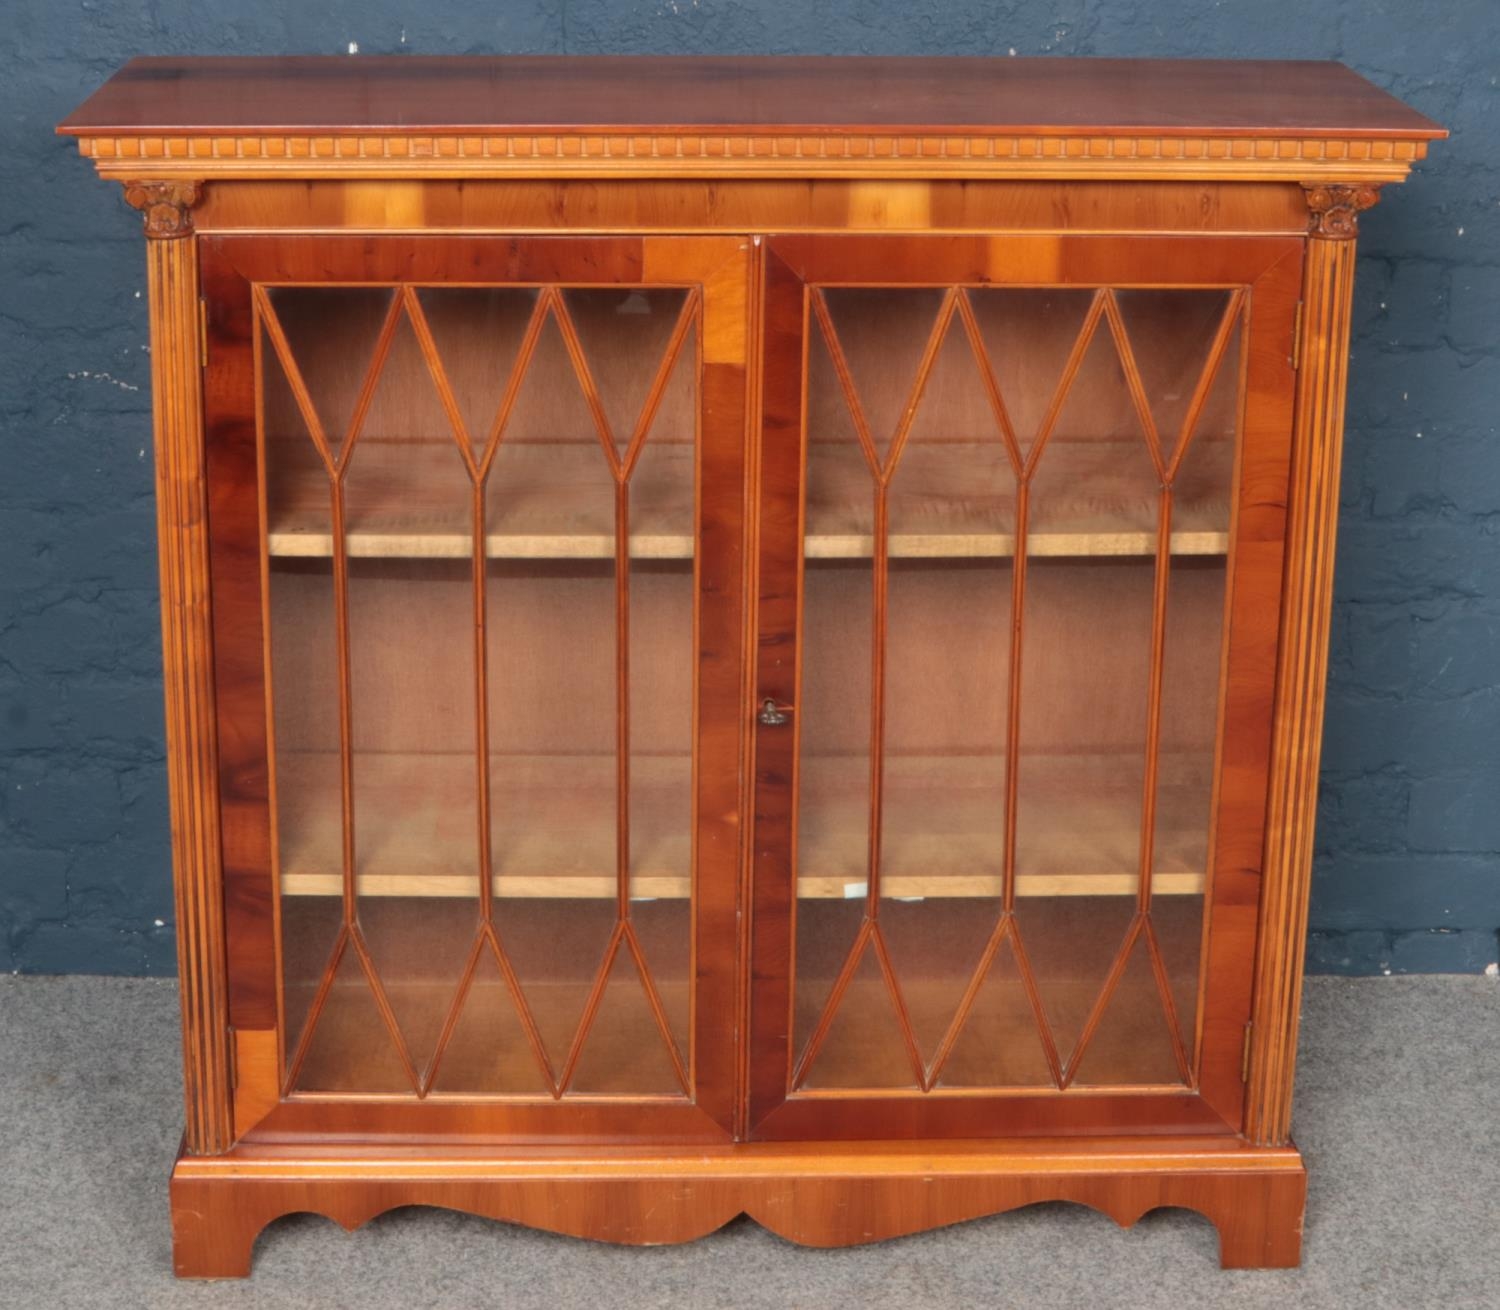 A Yew-Wood Glazed Two Door Bookcase.